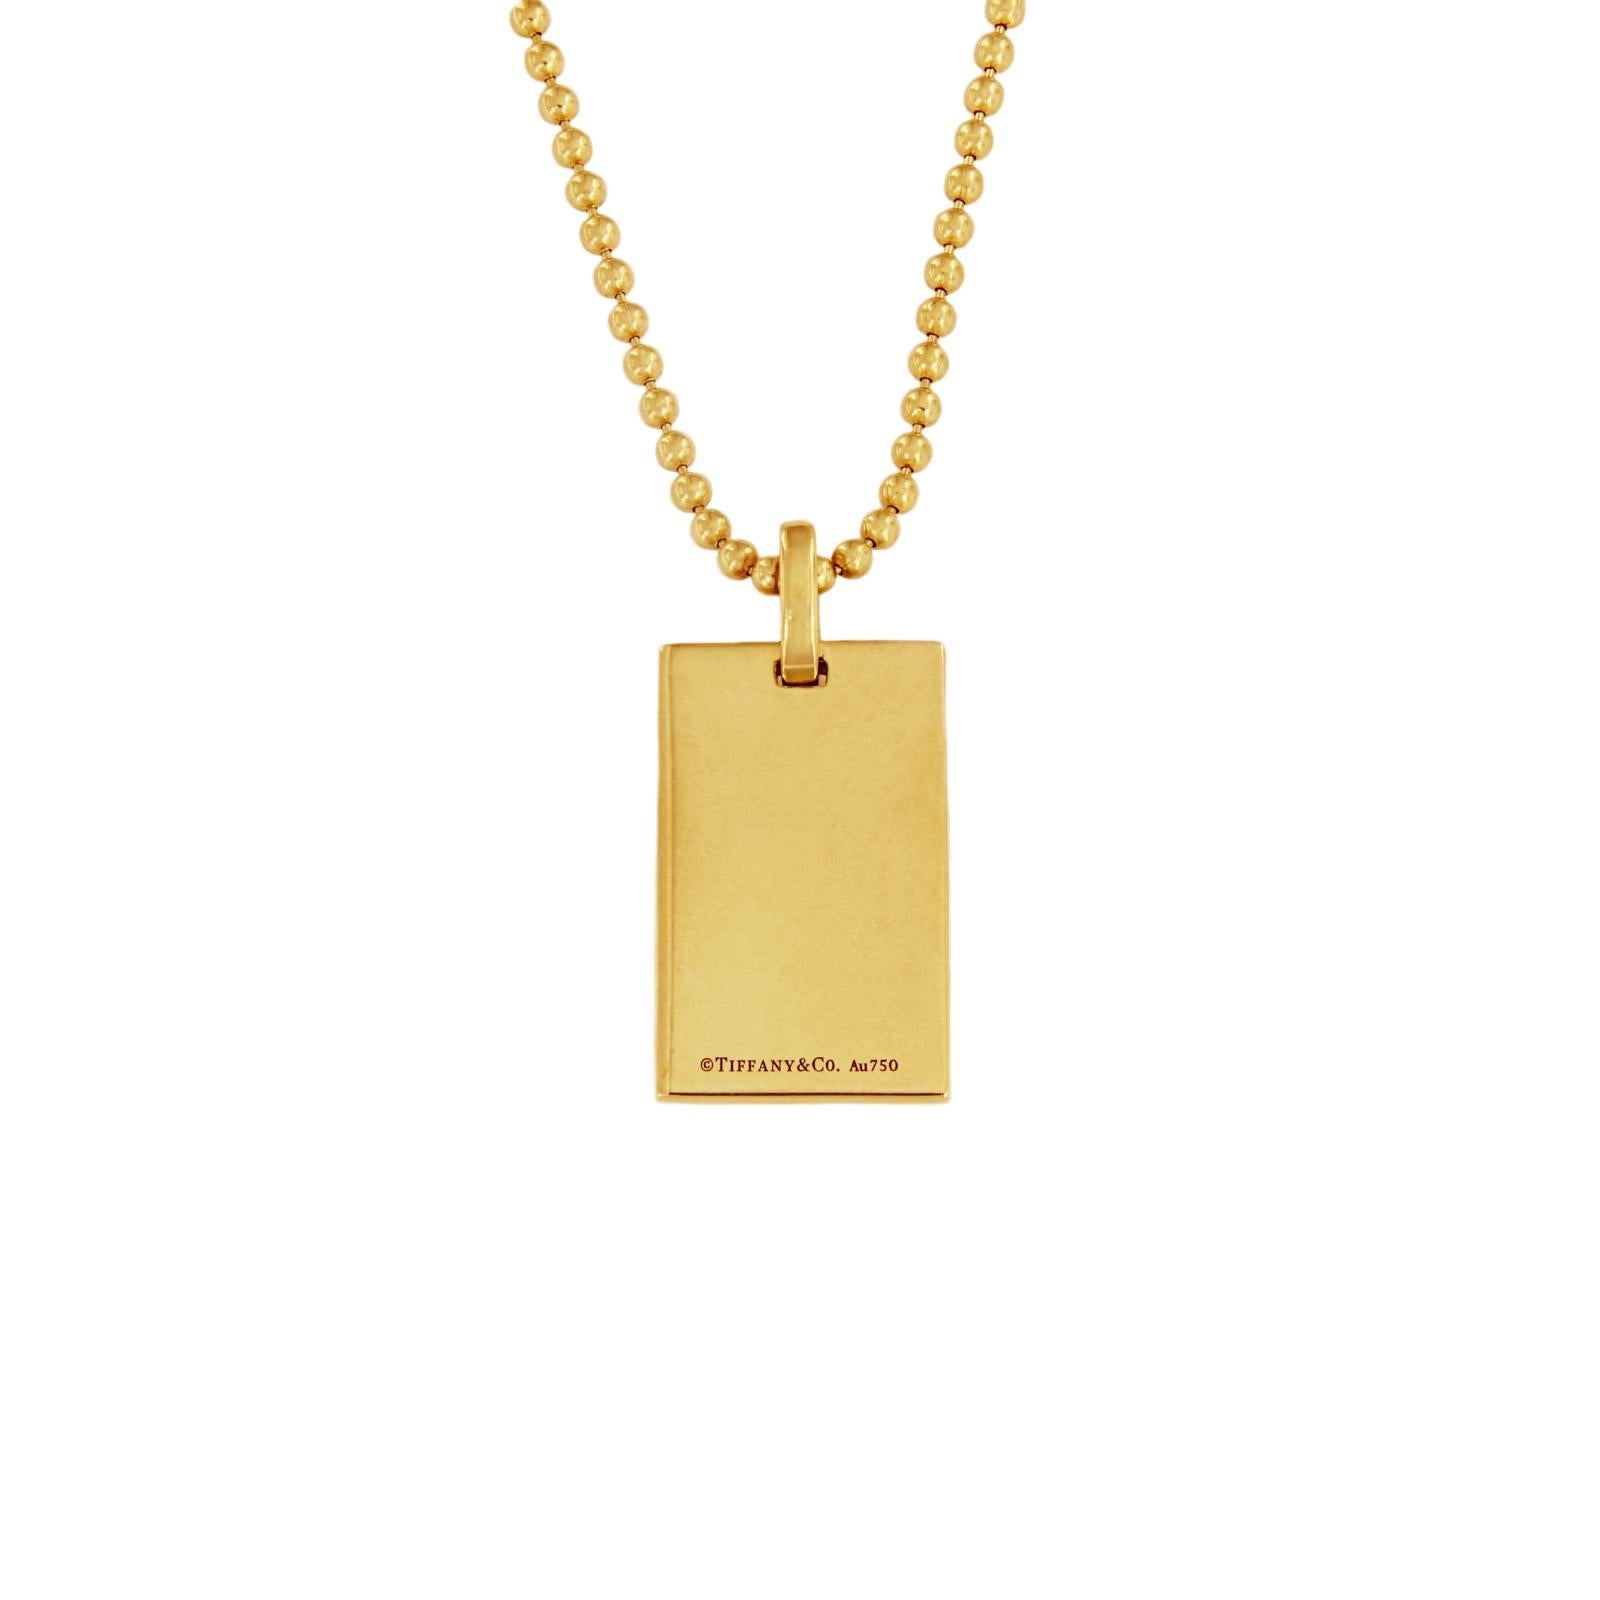 TIFFANY & CO. DIAMOND POINT RECTANGLE PENDANT IN 18K GOLD.

The geometric style of the Diamond Point collection lends a contemporary edge to classic designs. The bold rectangular shape of this pendant makes a graphic style statement both alone and